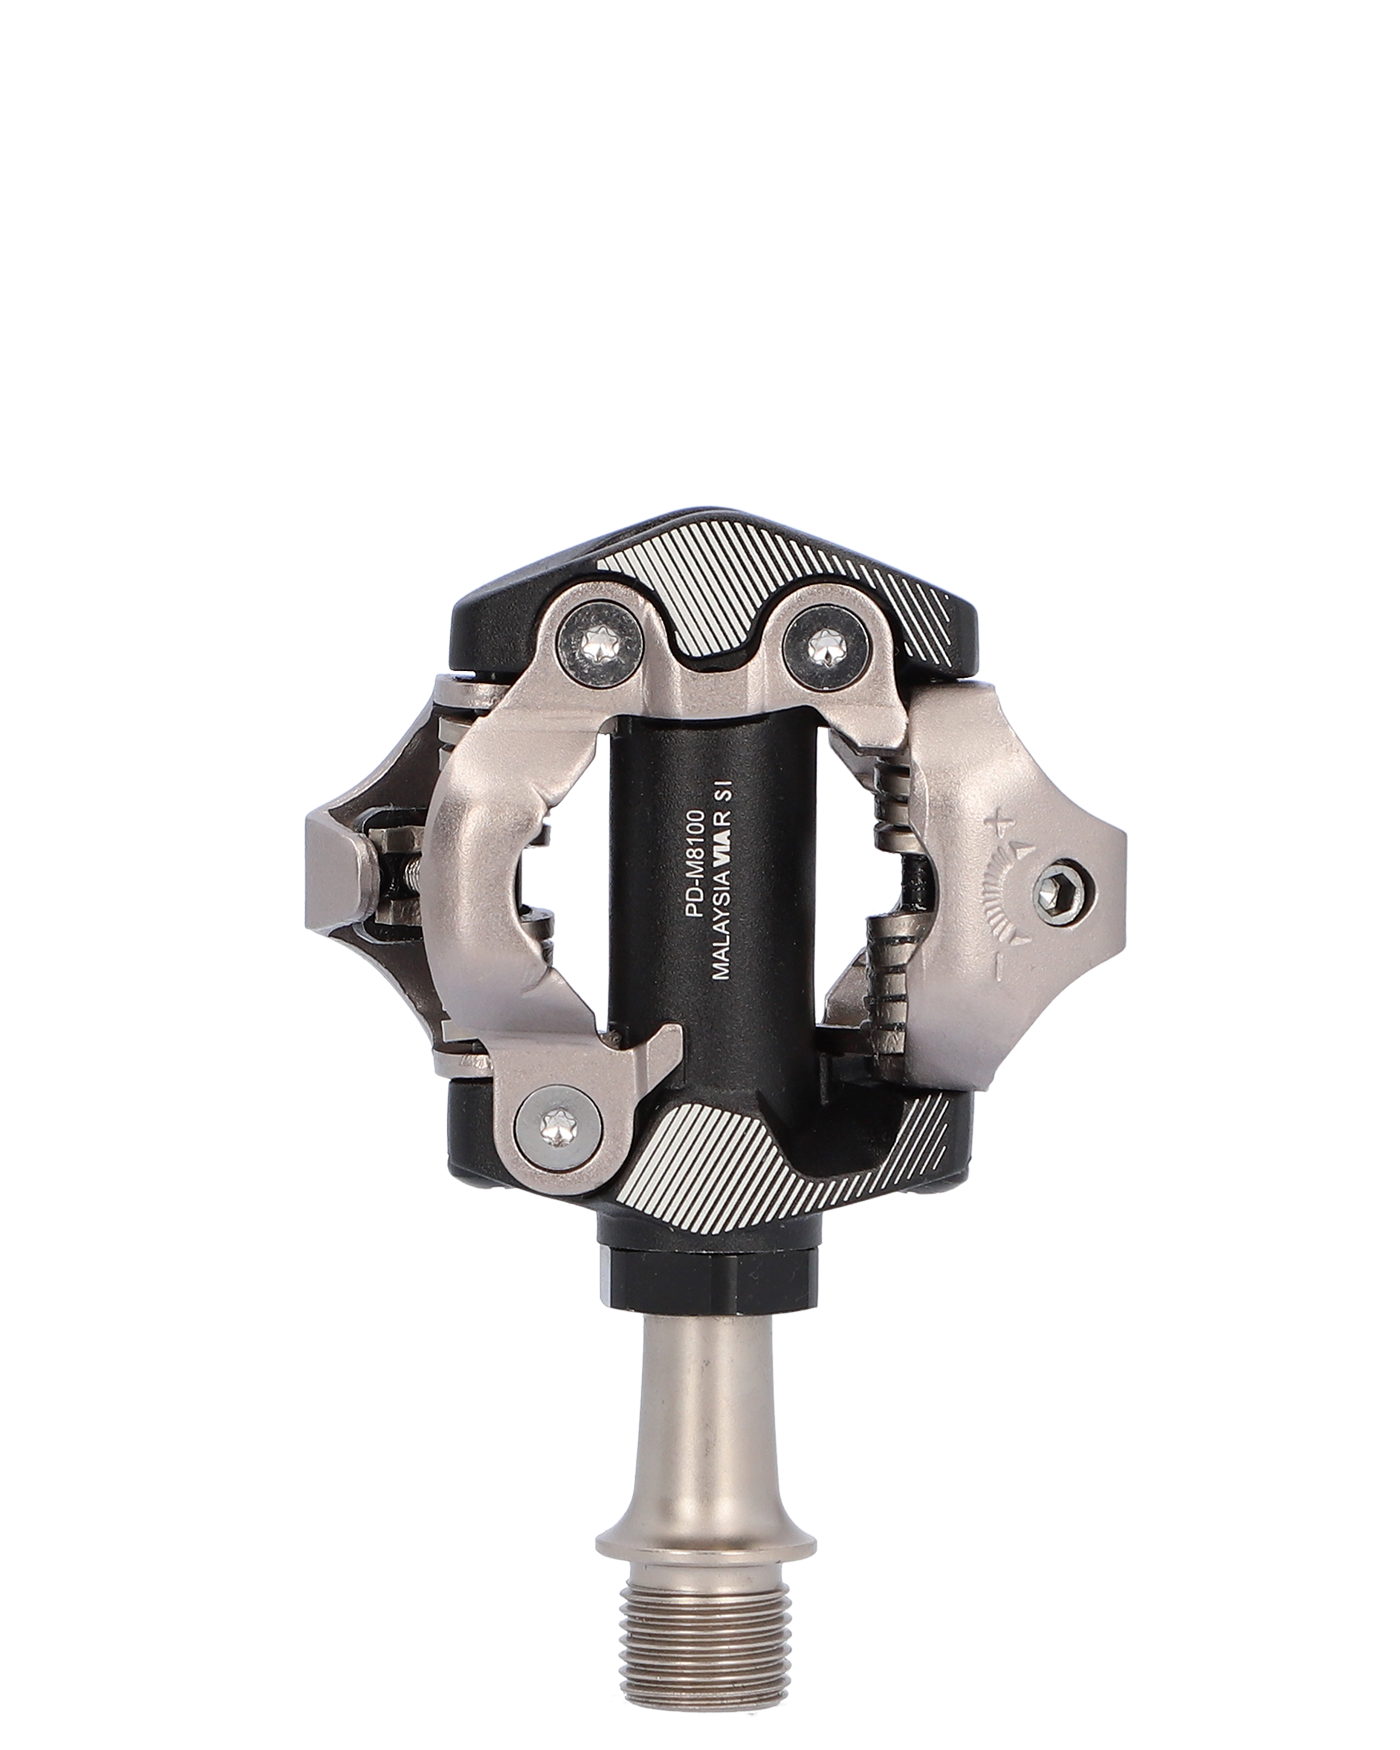 shimano deore pedals